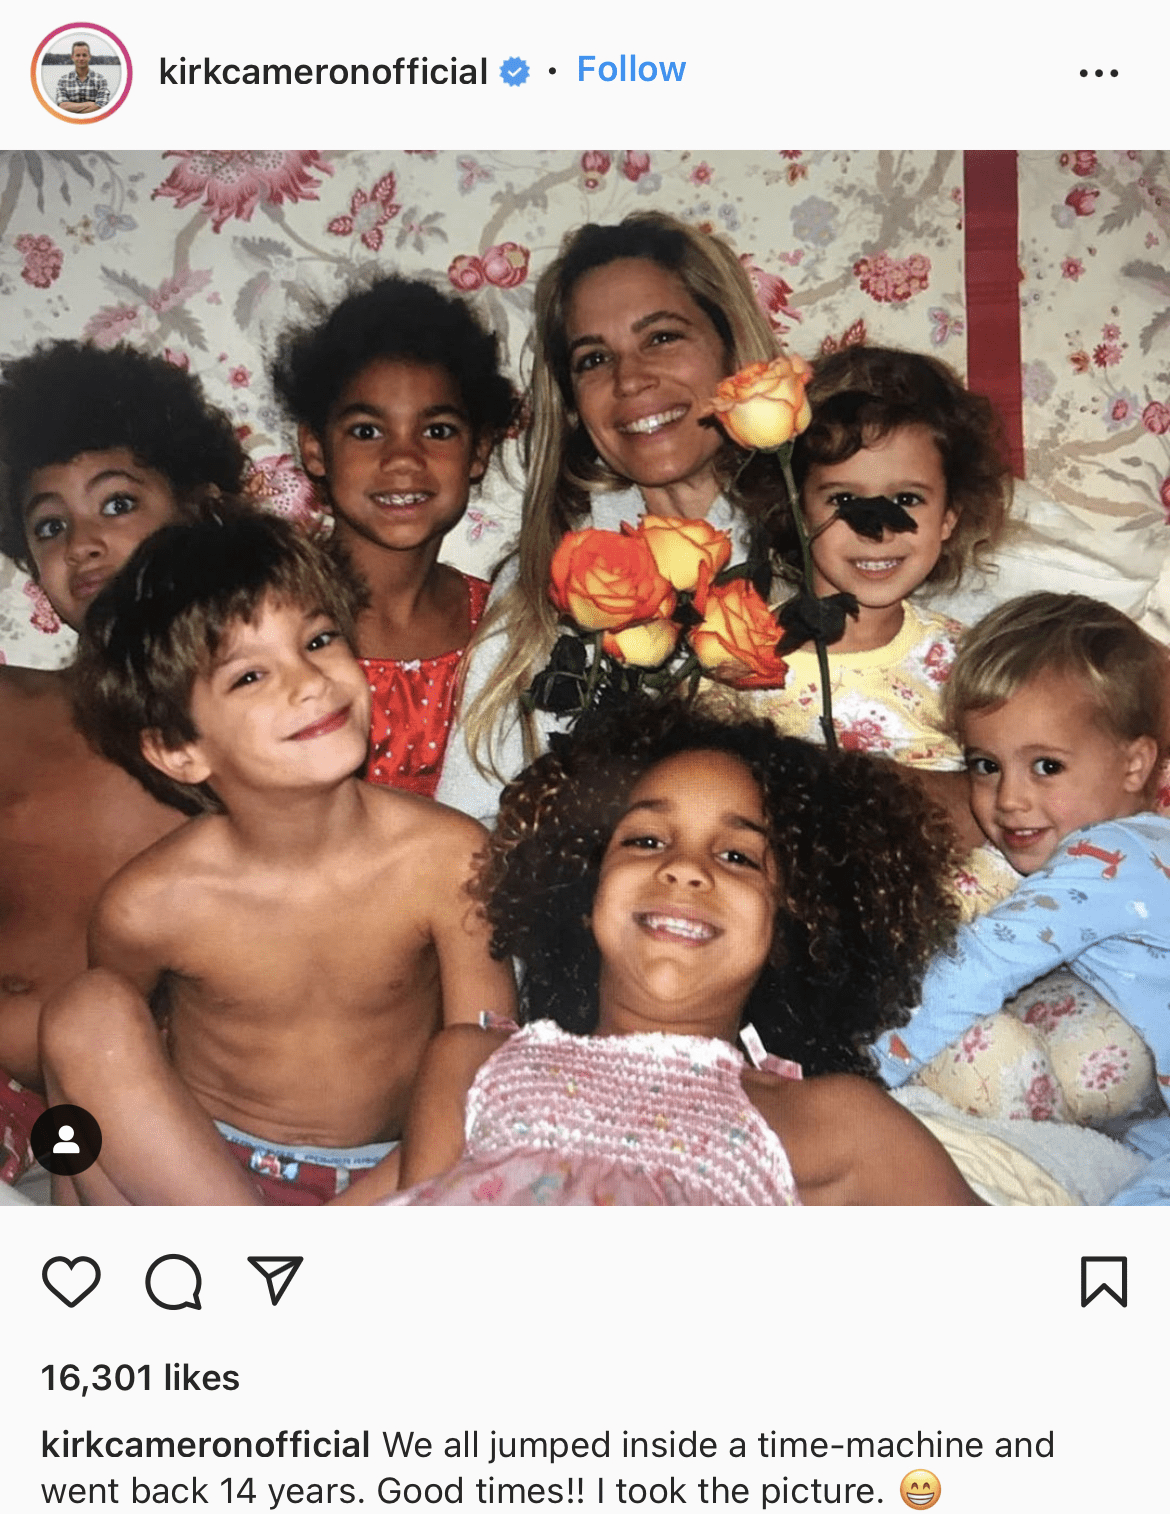 Chelsea Cameron with their six children | Photo: Instagram.com/kirkcameronofficial